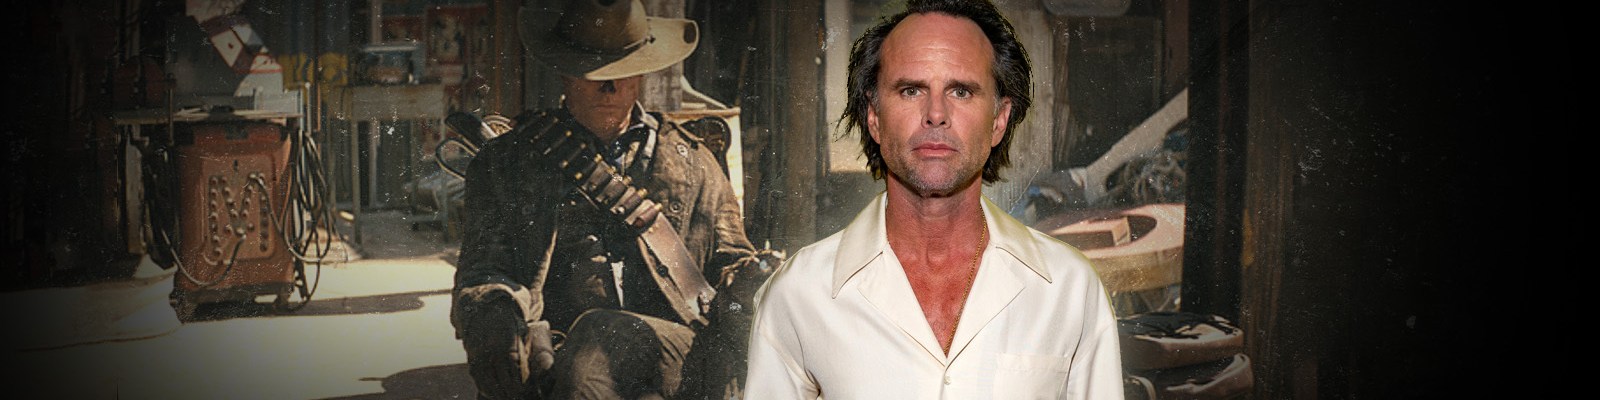 A Lovely Chat With Walton Goggins About ‘Fallout,’ ‘Justified,’ And Being A Solitary Man